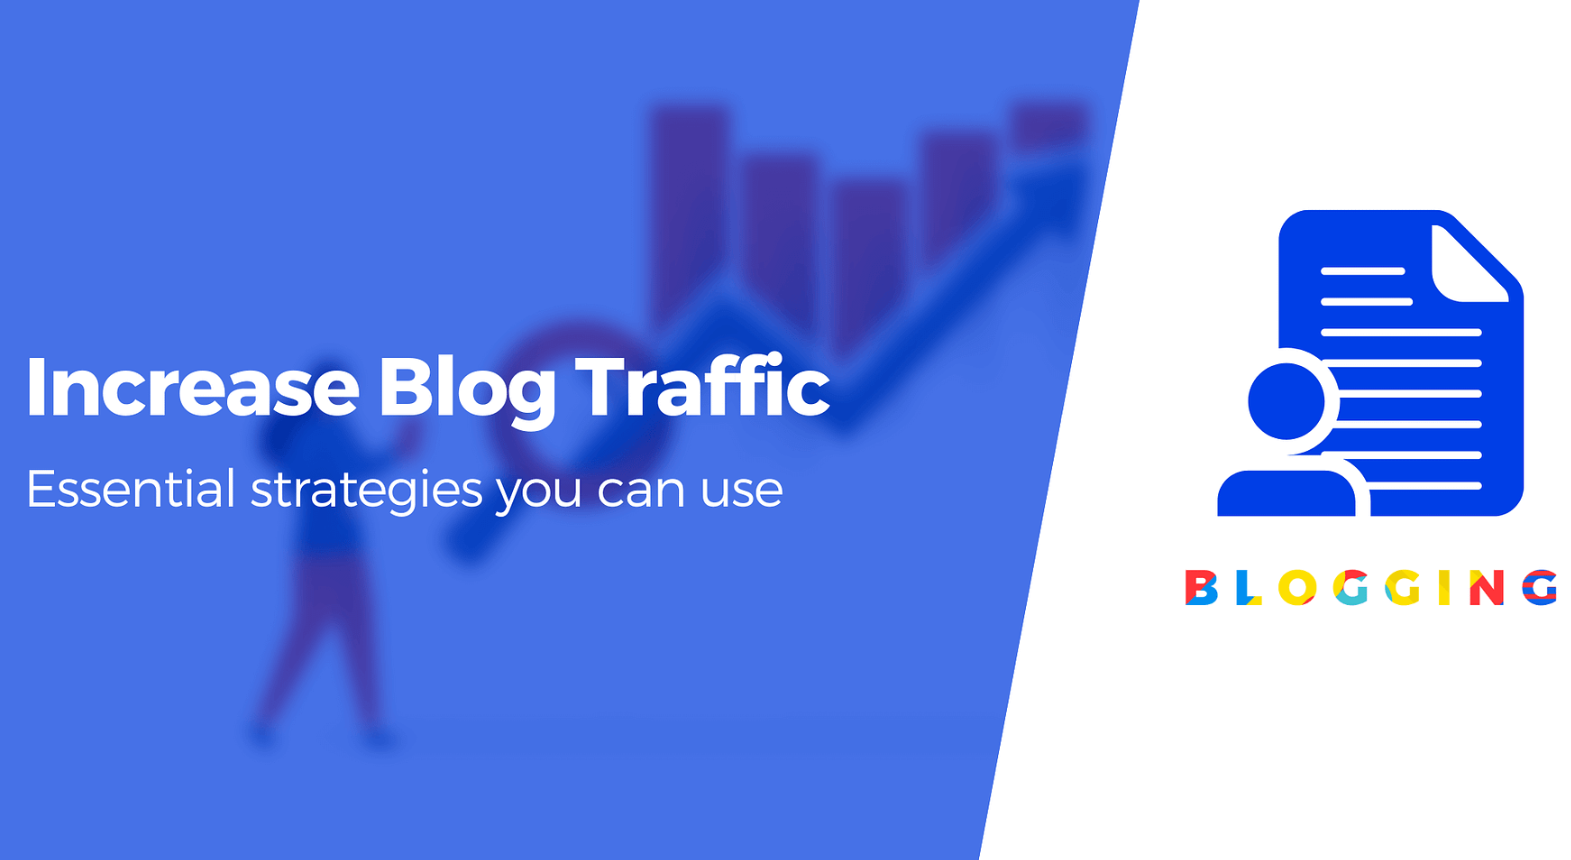 How to Get More Traffic and Views to Your WordPress Blog